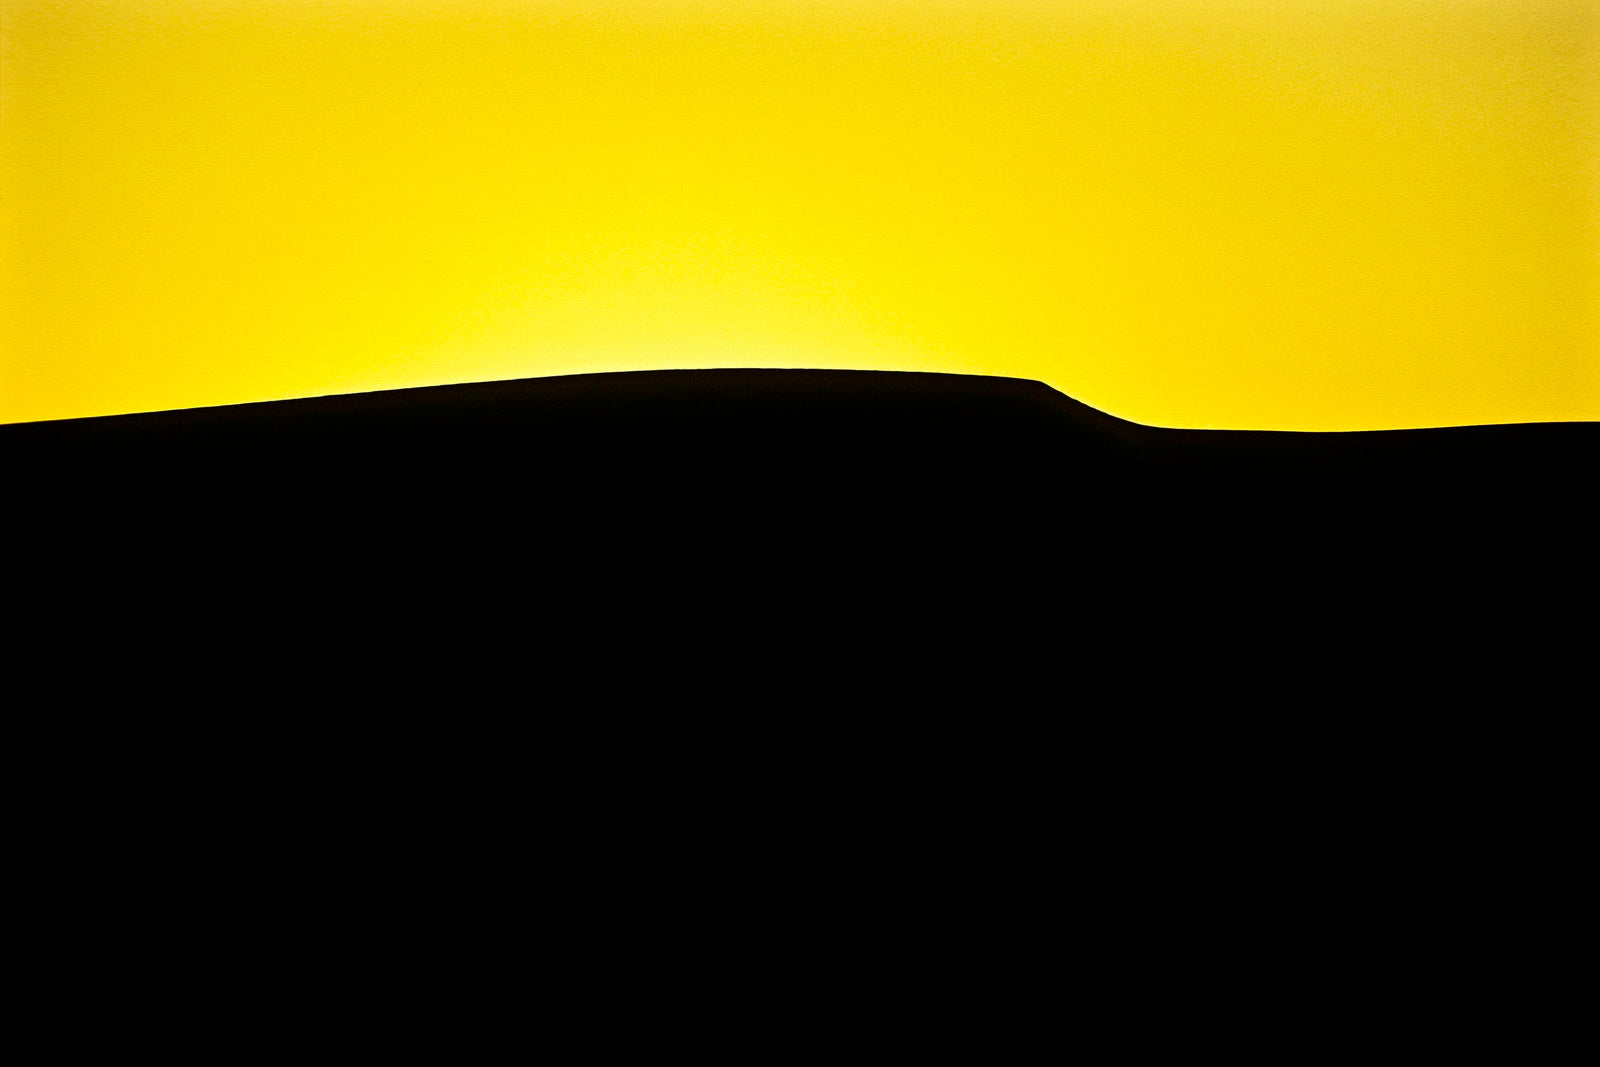 The silhouette of a vast sand dune crest against a vivid yellow sky. near Sossusvlei, Great Southern Dune Field, Namib-Naukluft National Park, Namibia.